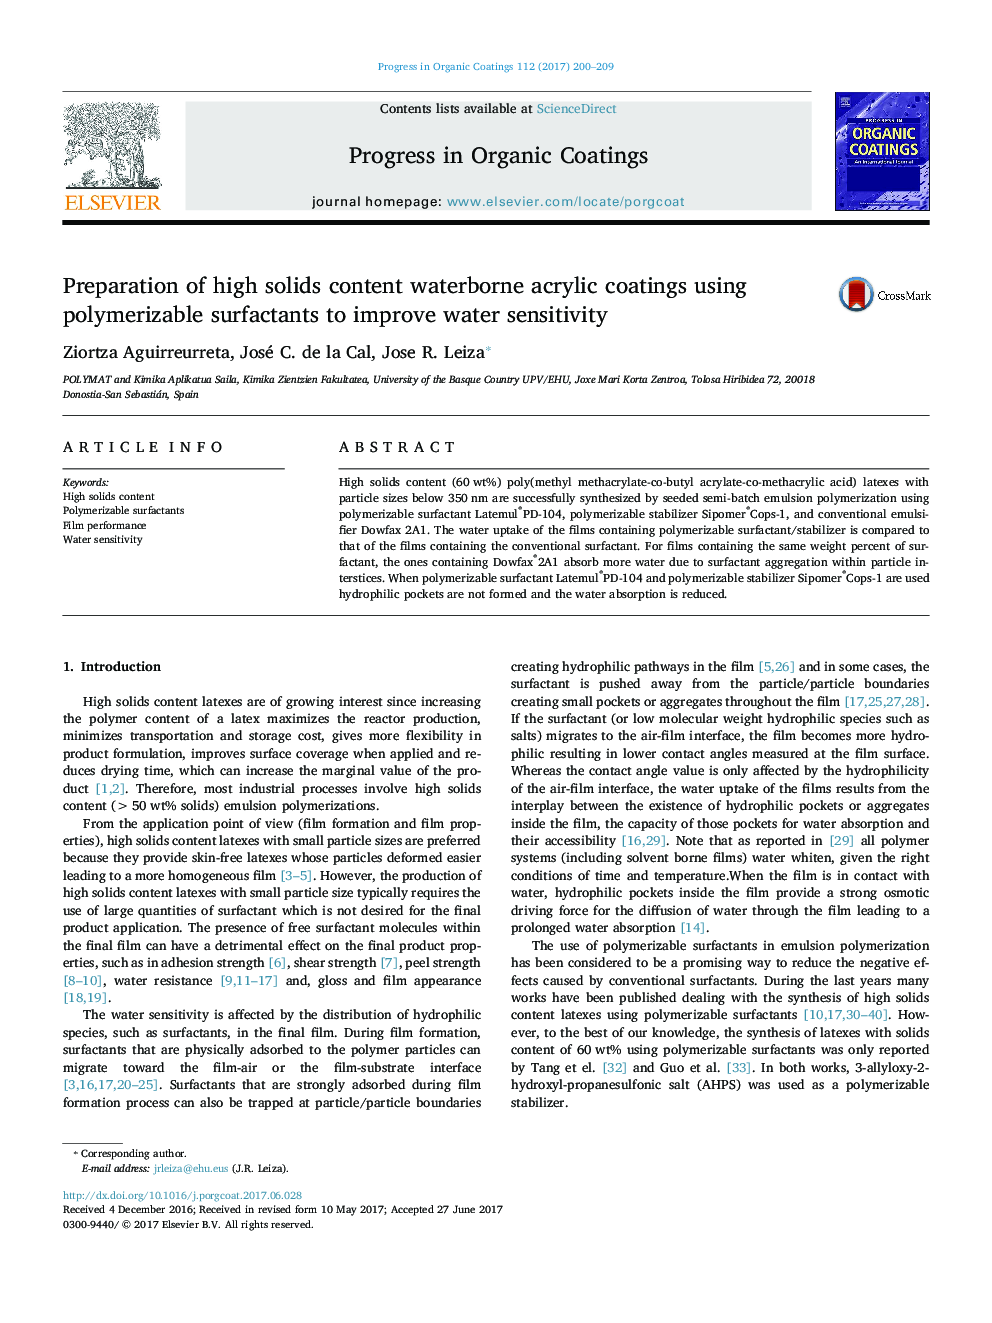 Preparation of high solids content waterborne acrylic coatings using polymerizable surfactants to improve water sensitivity